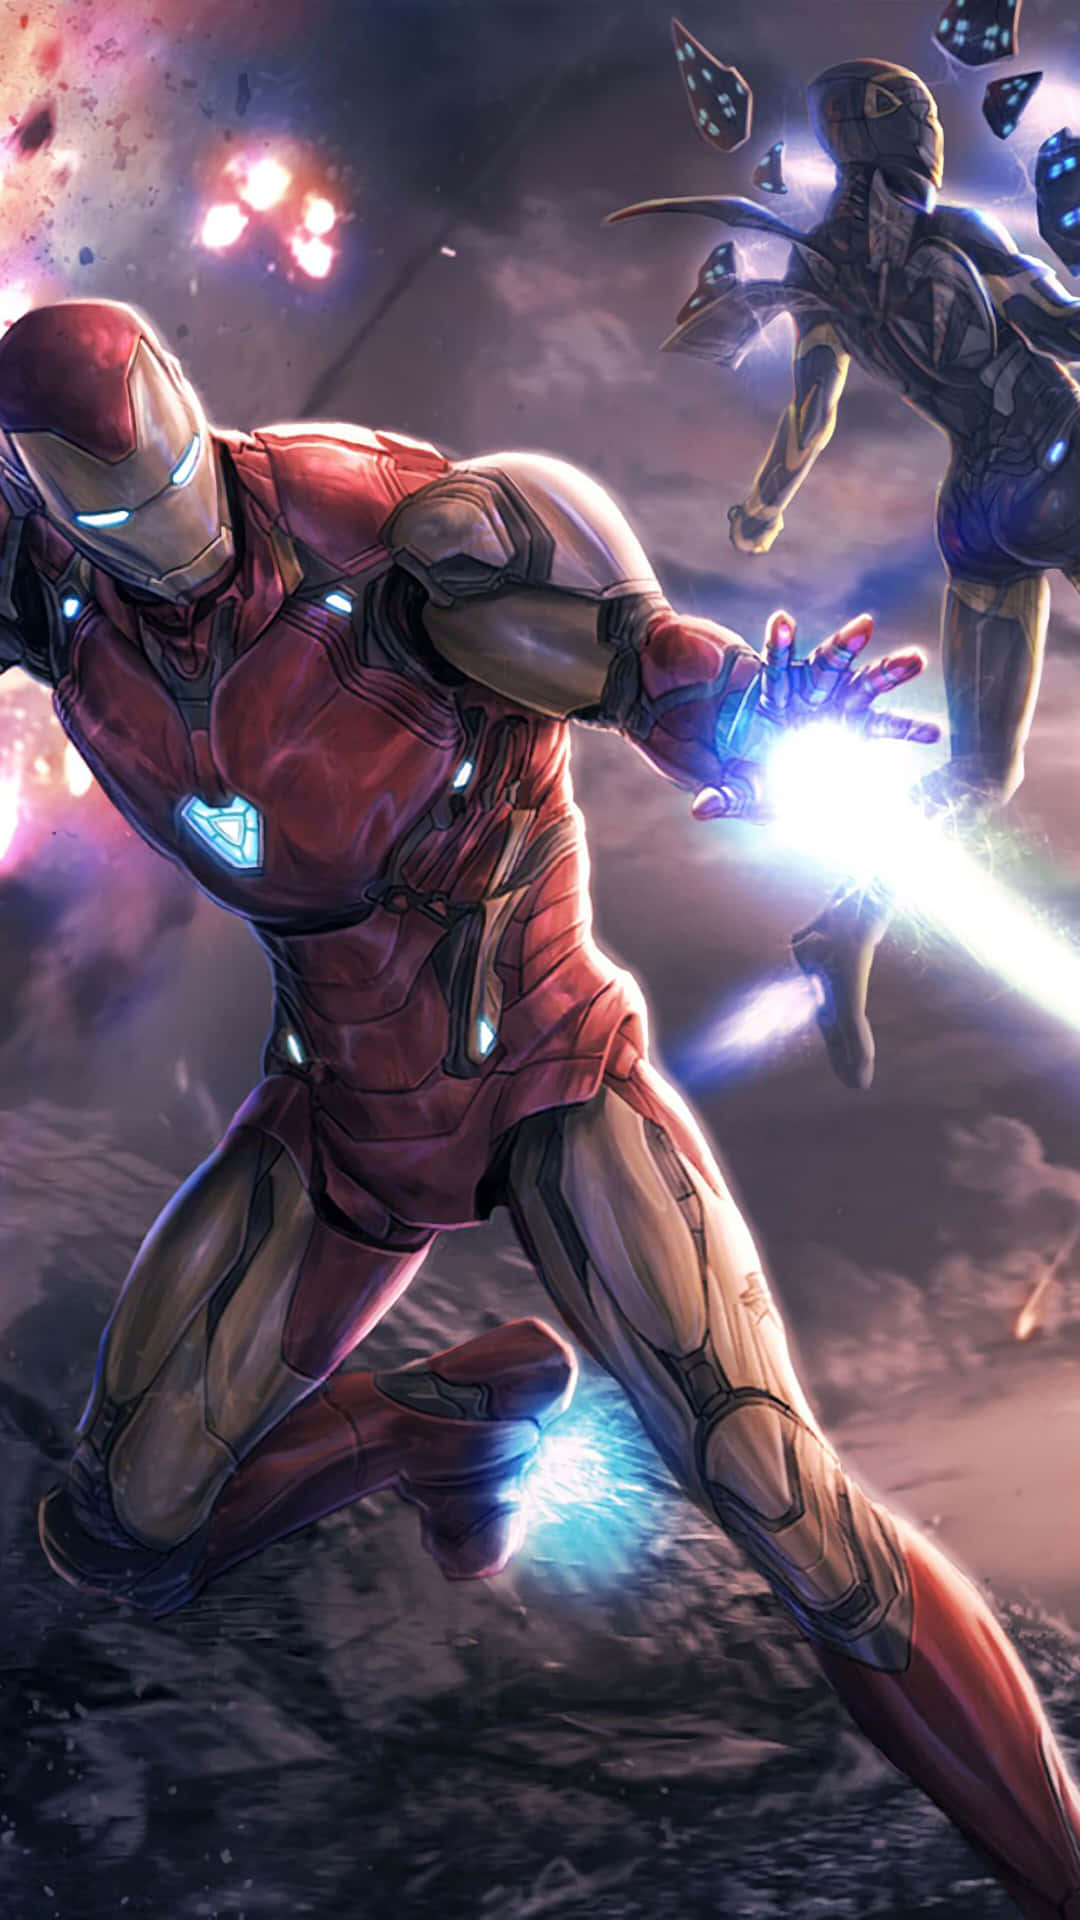 Caption: The Invincible Iron Man In Action